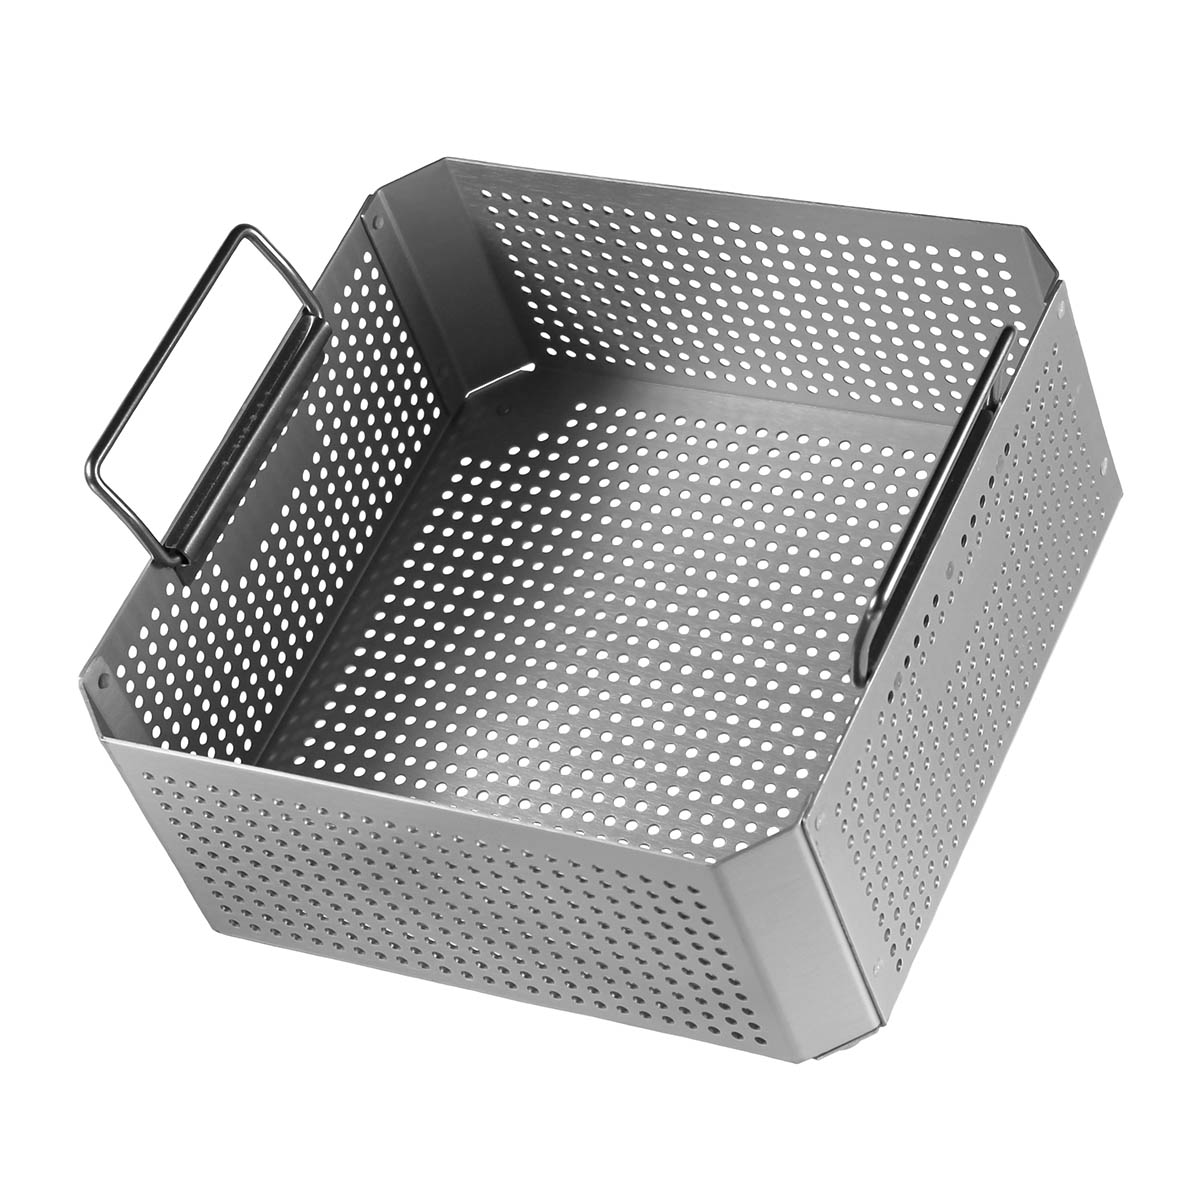 Basket For Half Size Container 9 7 X 9 7 X 4 5 Boss